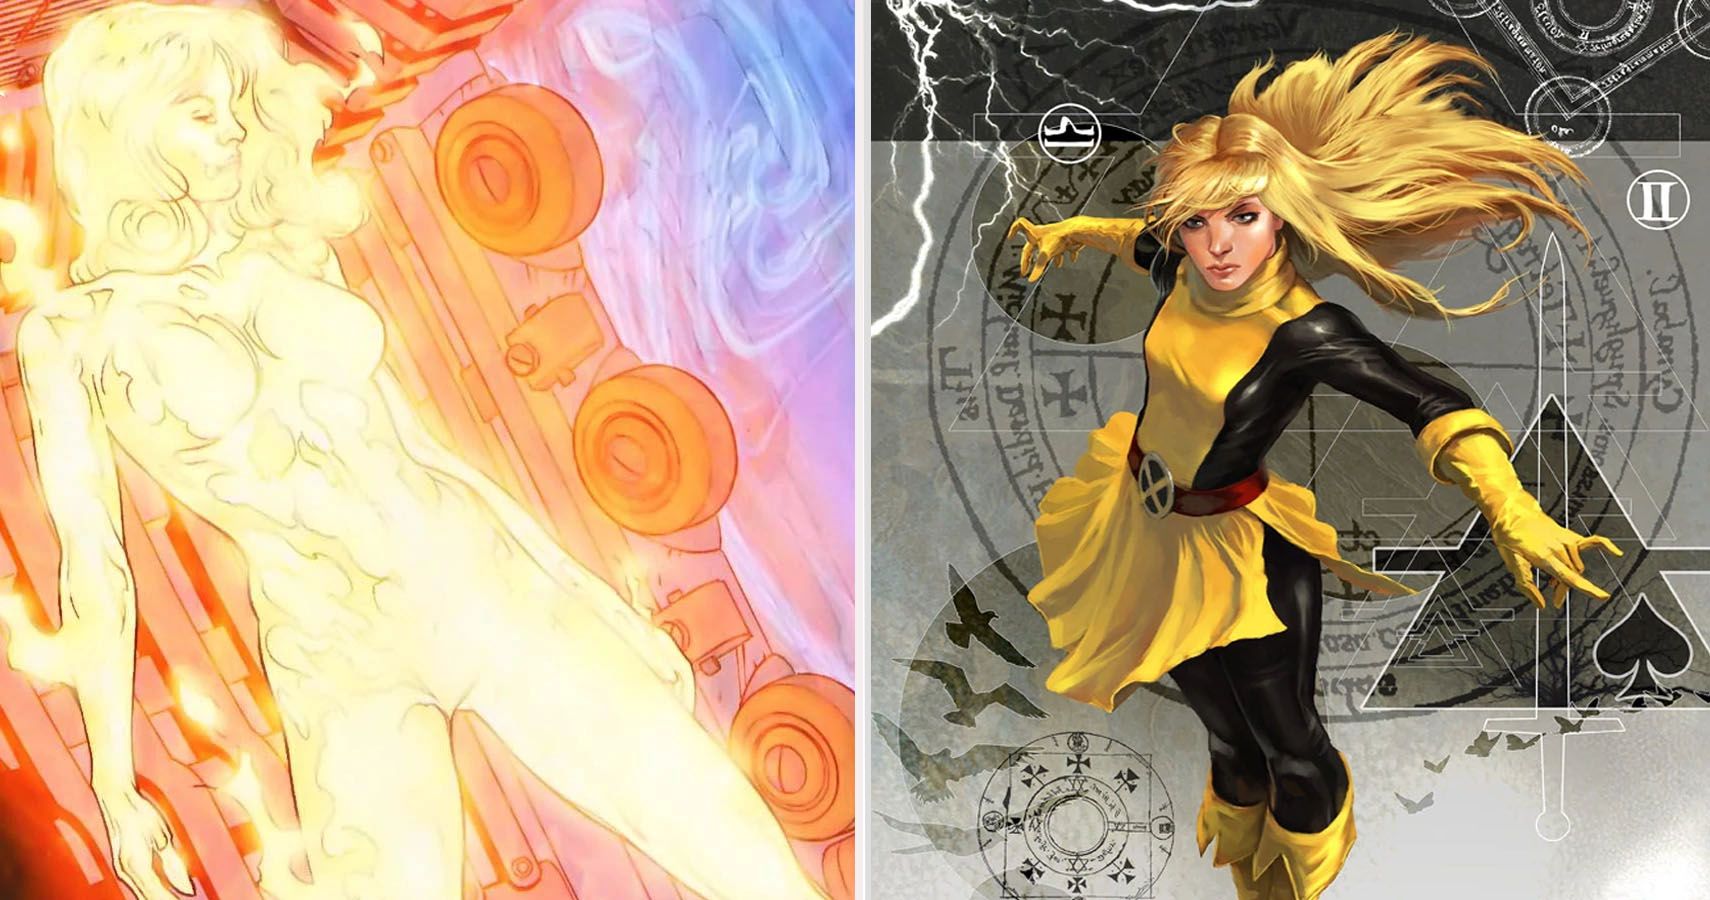 Every Member Of The New Mutants, Ranked By Growth